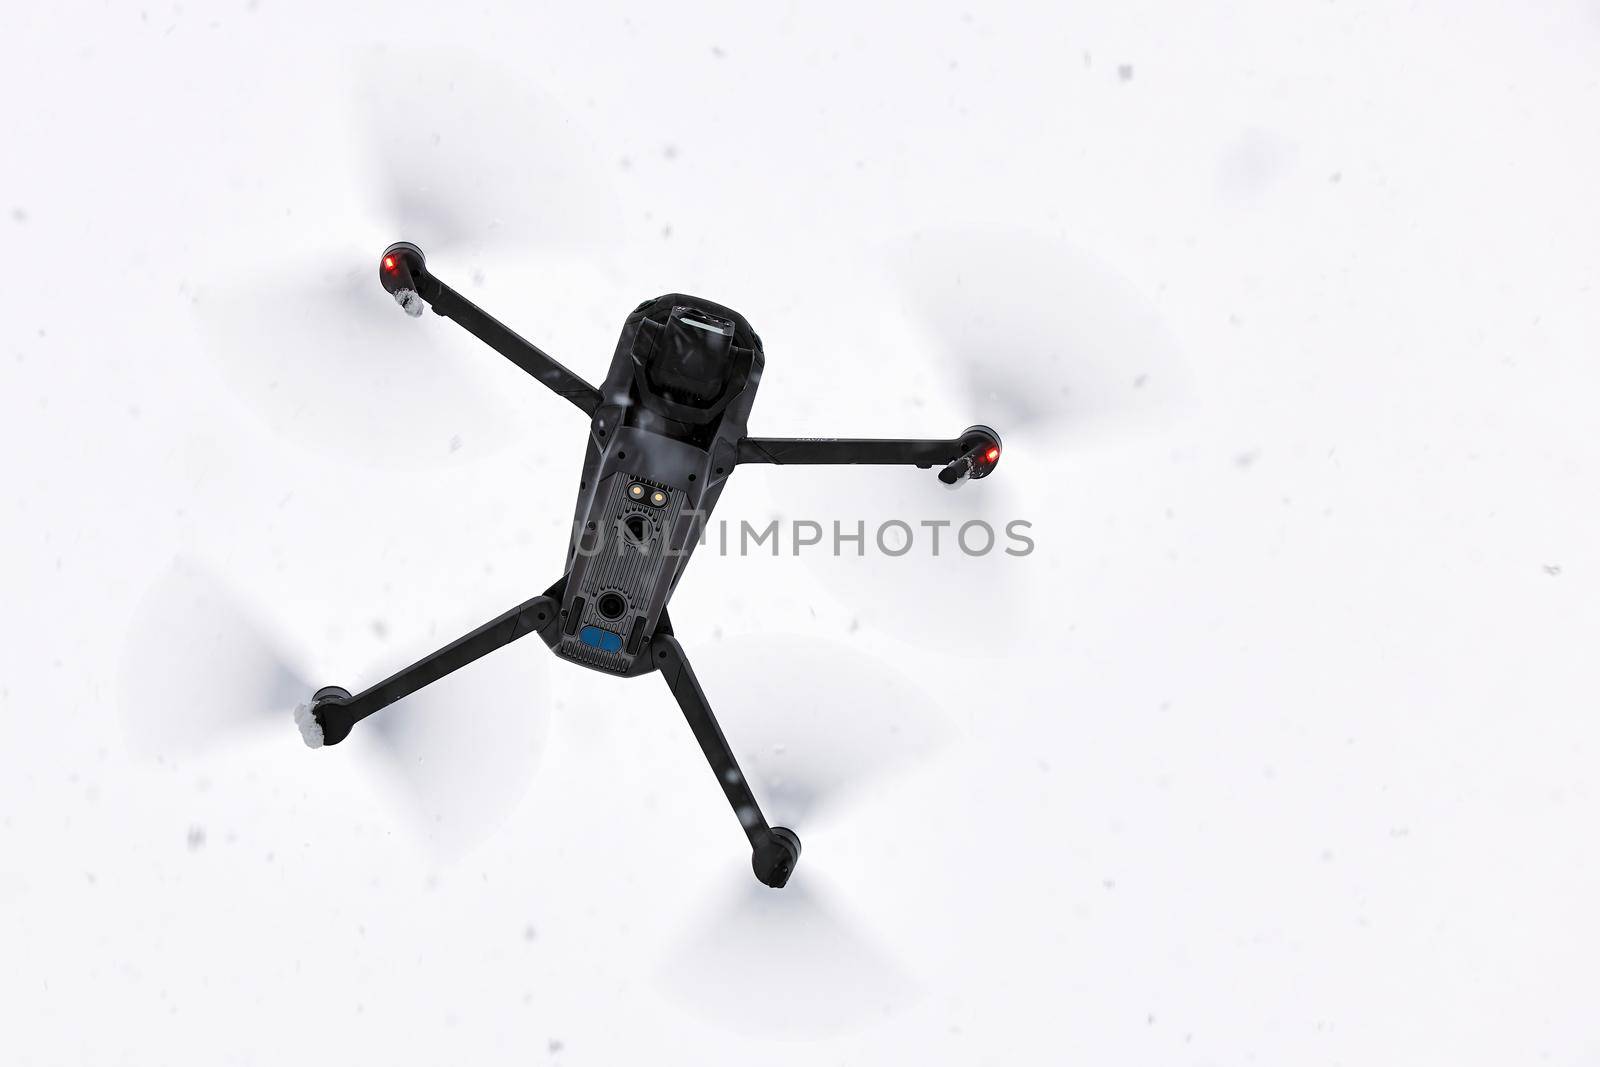 New DJI Mavic 3 bottom view, flying in snow conditions. DJI Mavic 3 one of the most portable drones in the market, with Hasselblad camera. 25.01.2022 Rostov-on-Don, Russia.